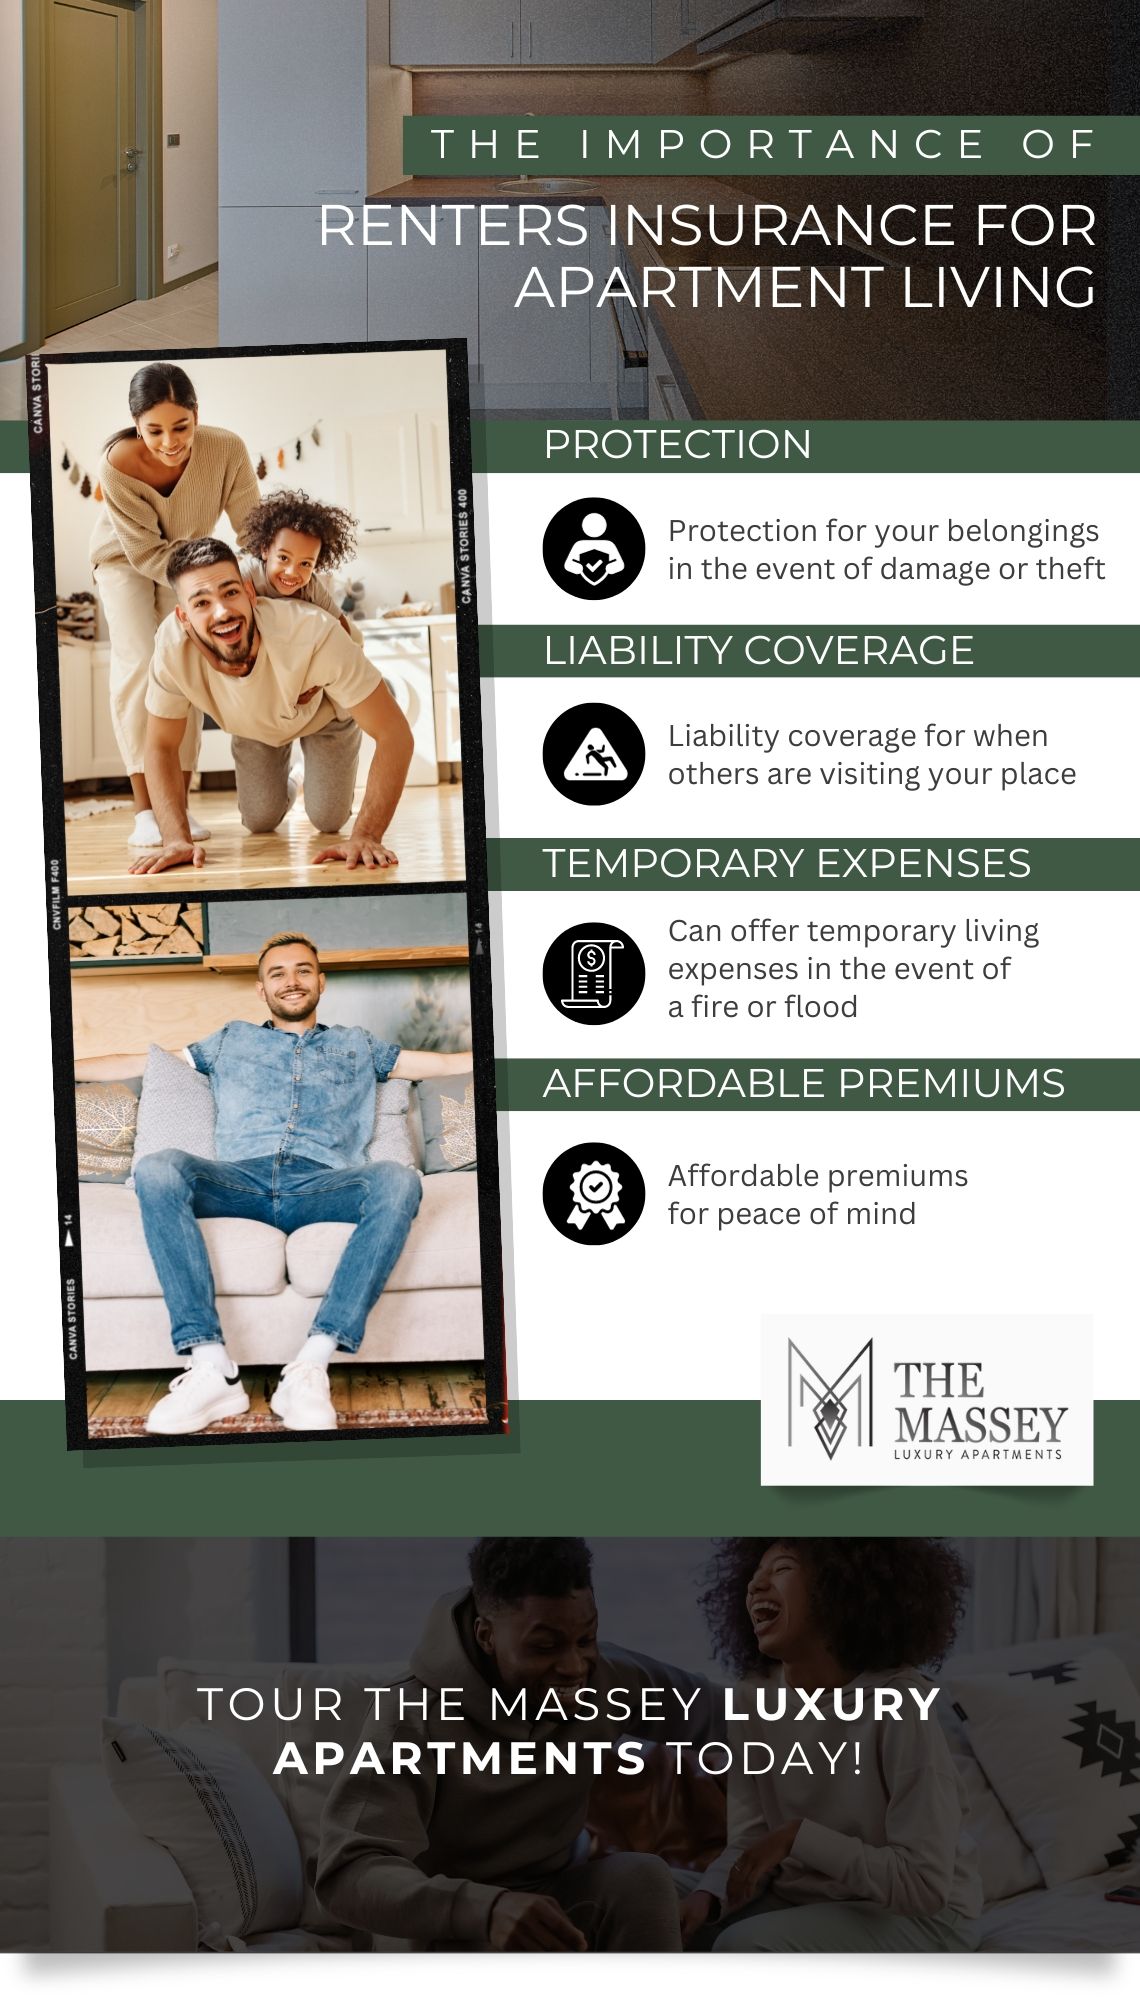 M31994-The Massey_The Importance of Renters Insurance for Apartment Living.jpg